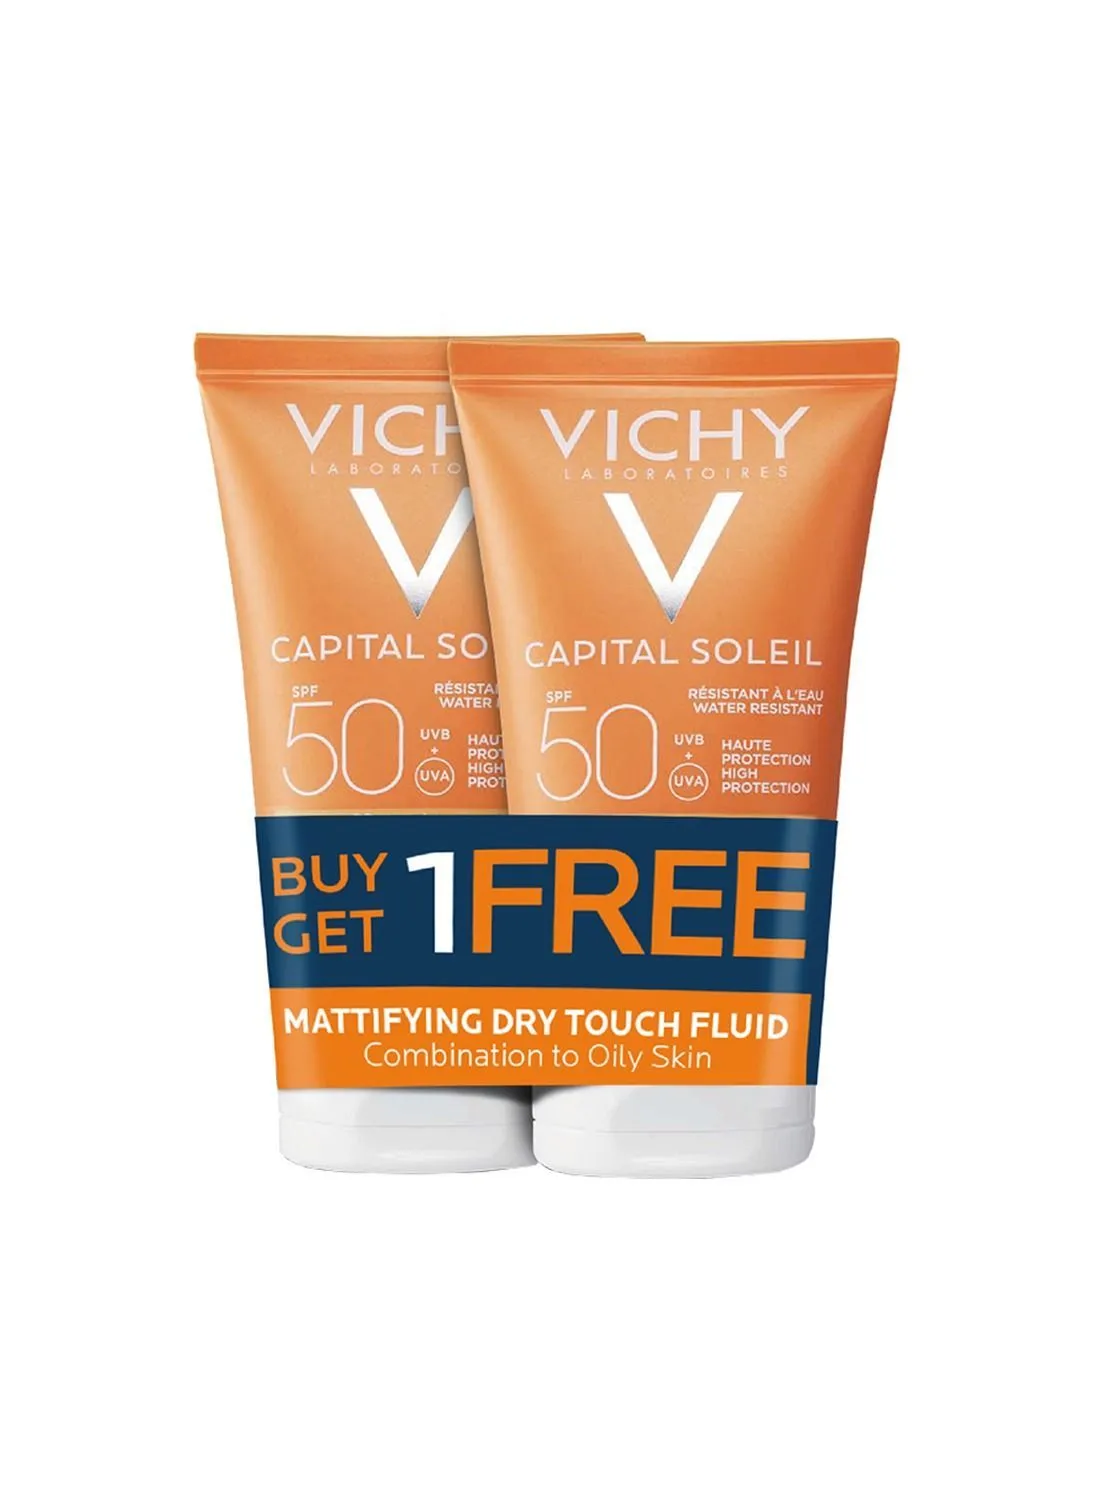 Vichy Capital Soleil Dry Touch SPF50 Buy 1 Get 1 Free, Sunscreen for Oily Skin